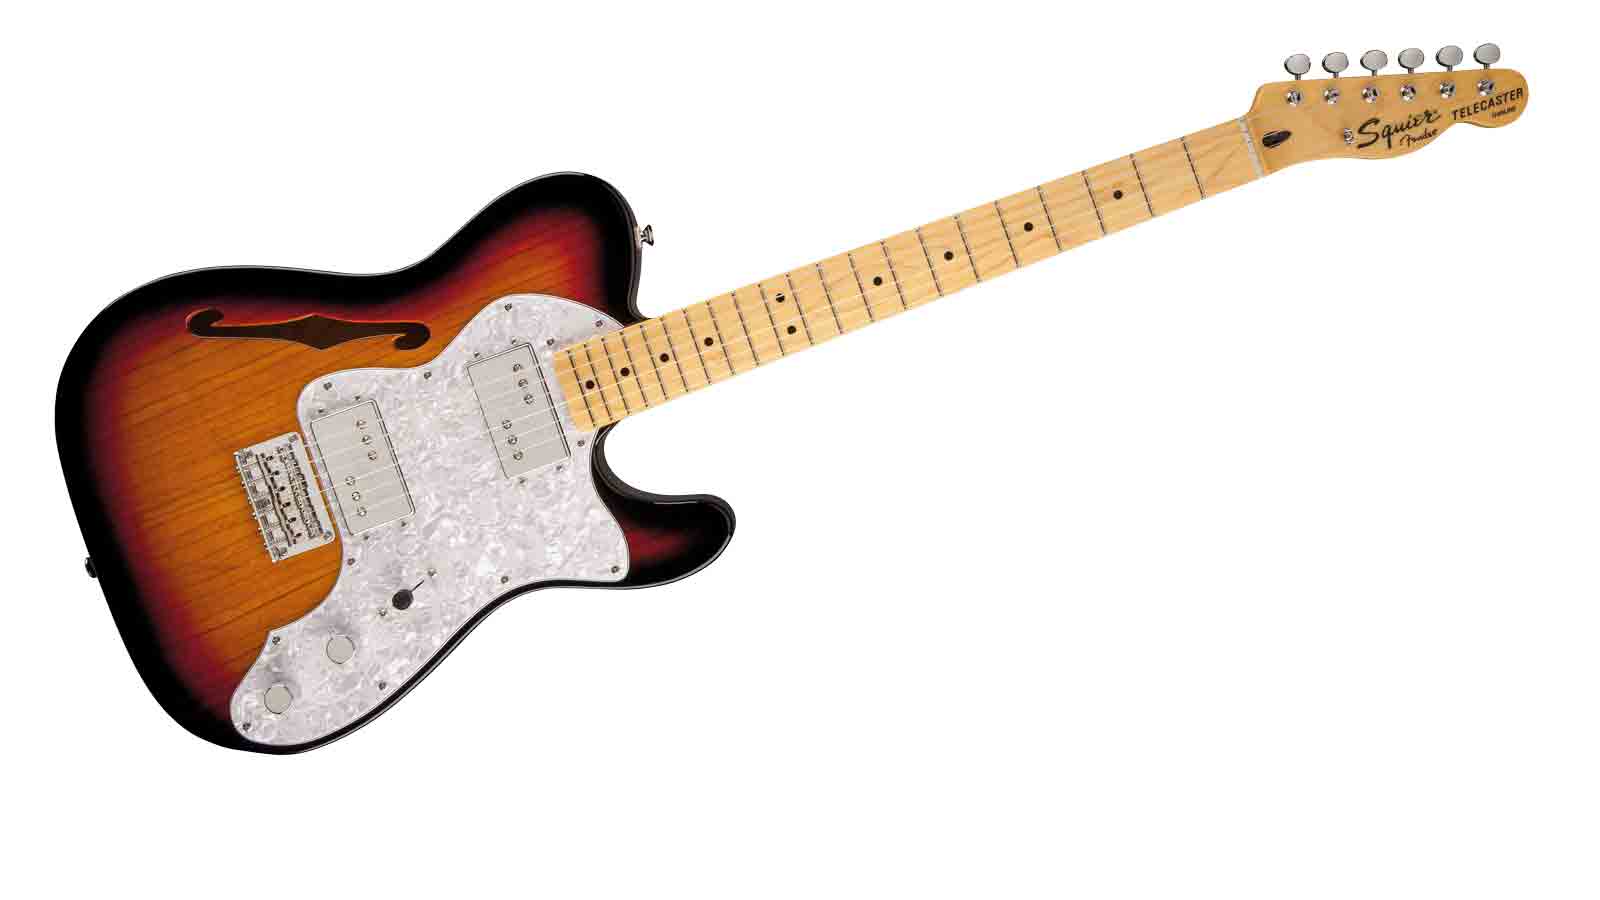 Squier Vintage Modified '72 Telecaster Thinline review | MusicRadar